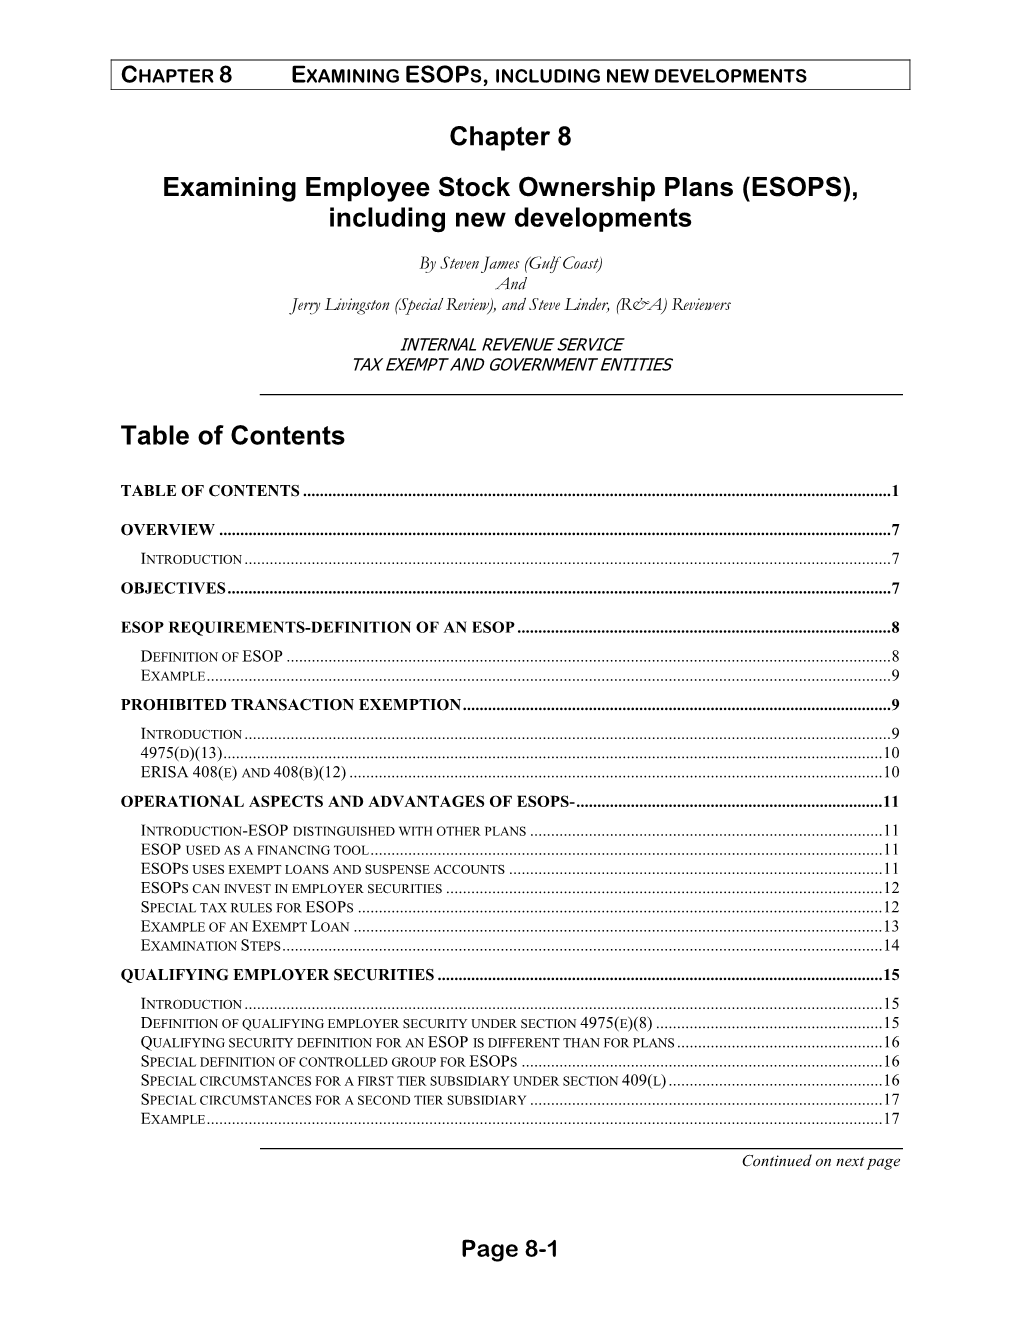 Chapter 8 Examining Employee Stock Ownership Plans (ESOPS), Including New Developments